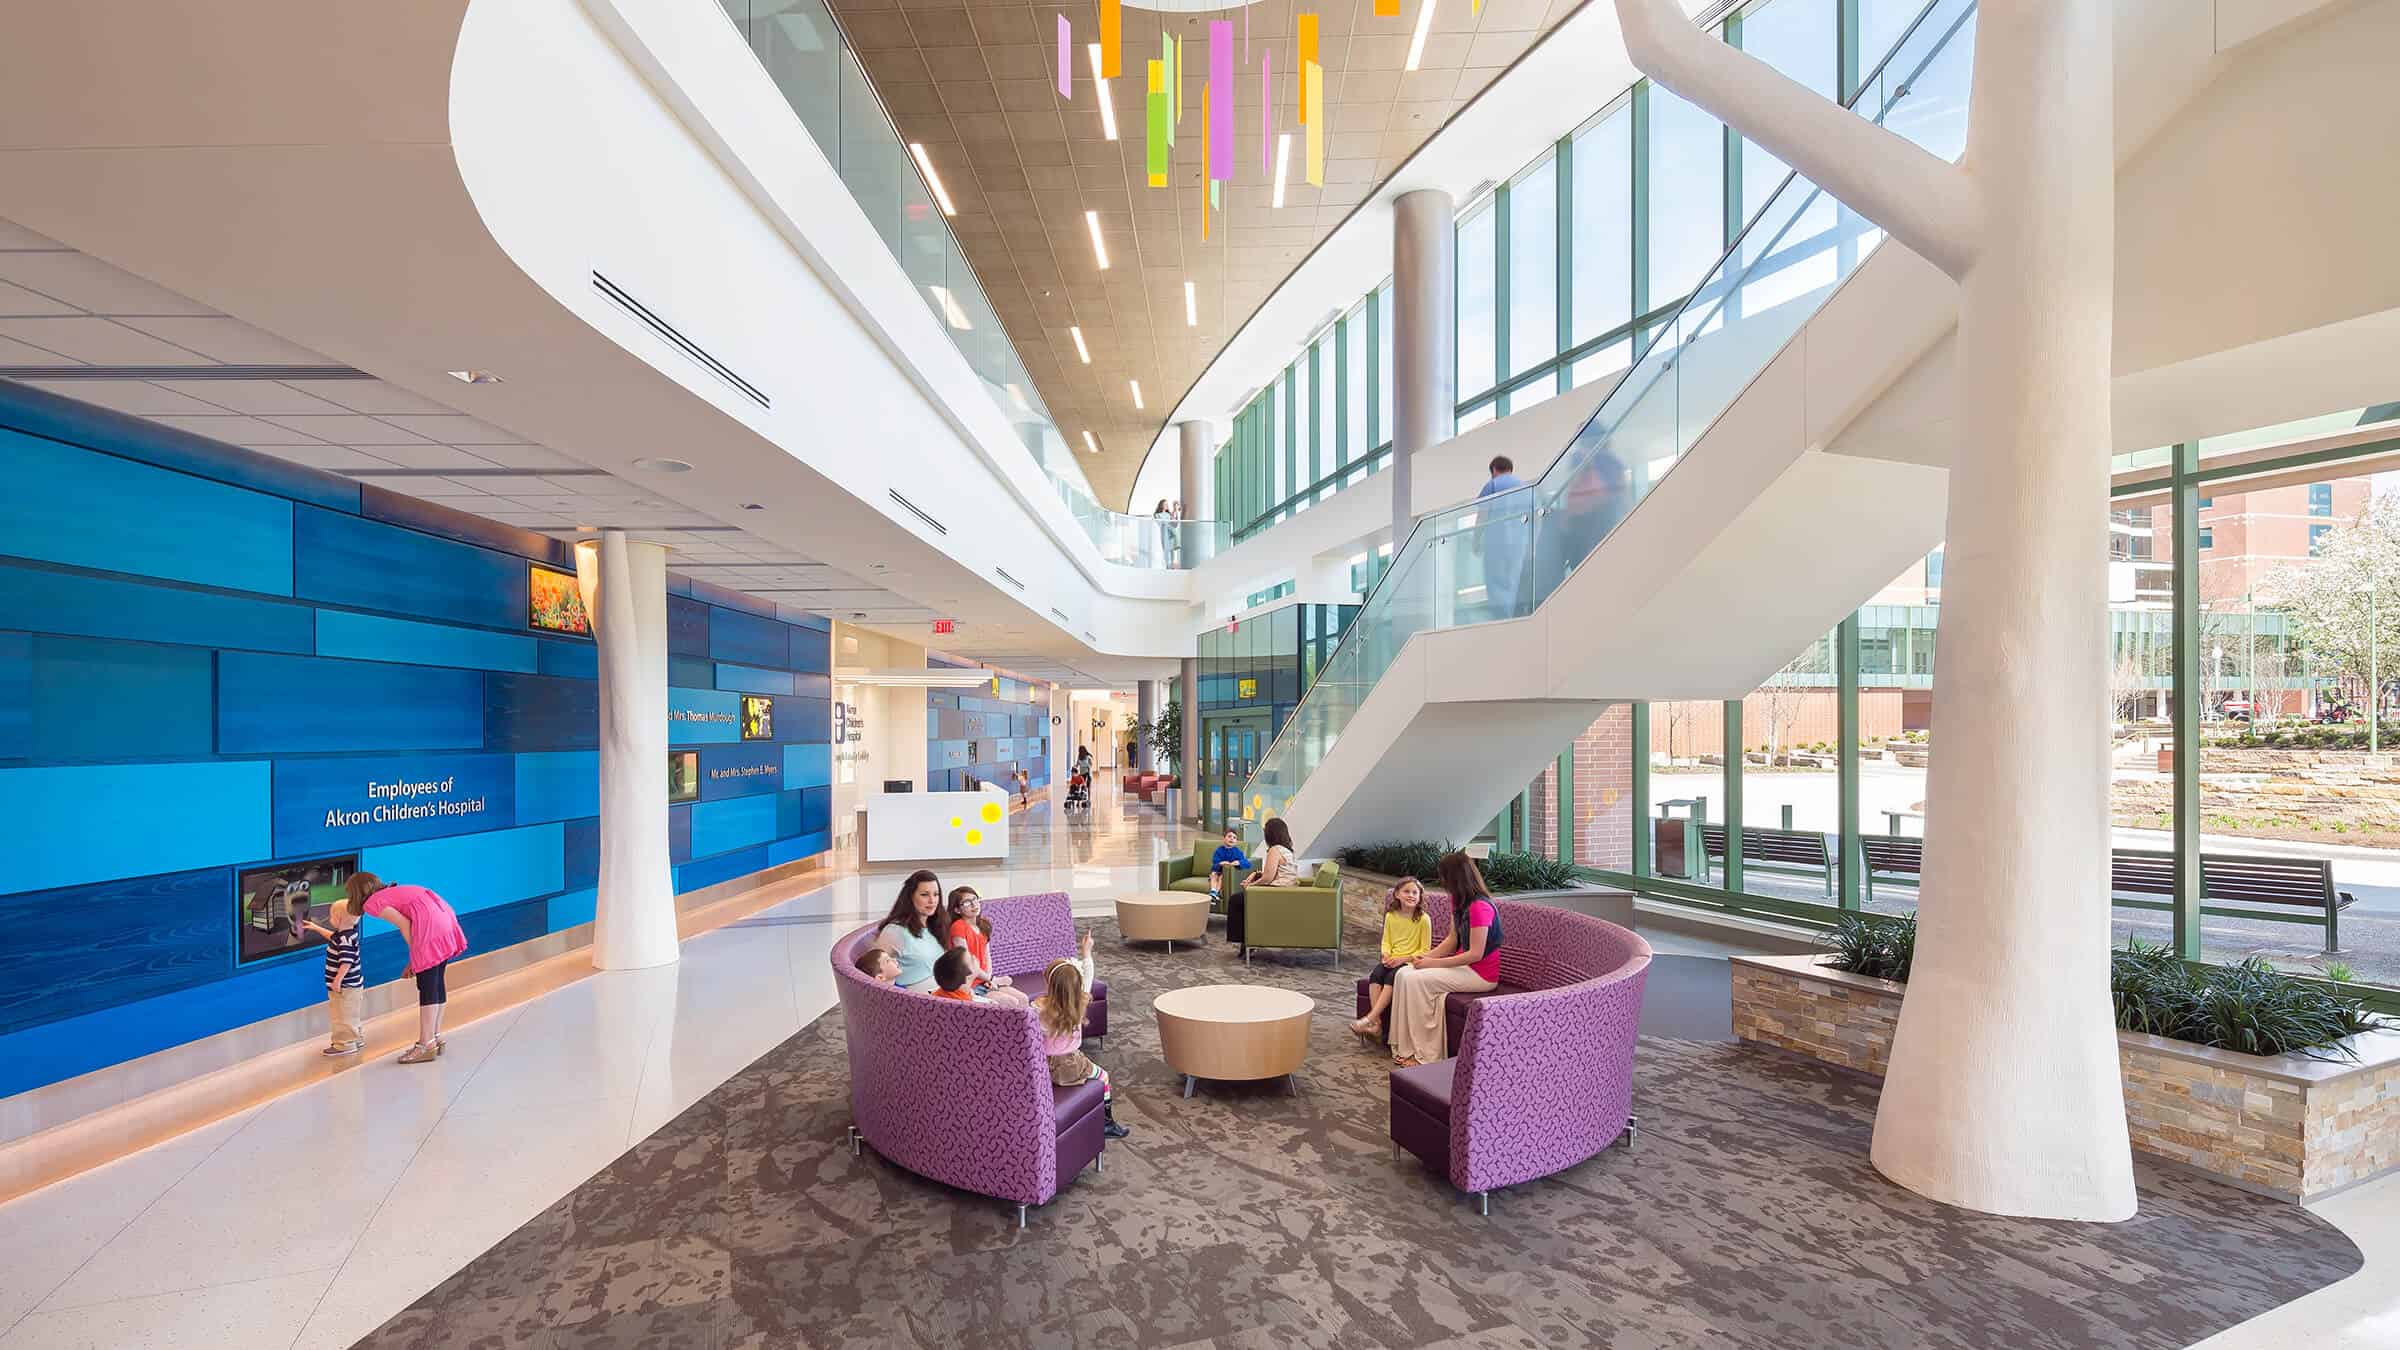 Akron Children's Hospital Lobby, Atrium and Stairwell with Outdoor Views - Completed Healthcare Construction